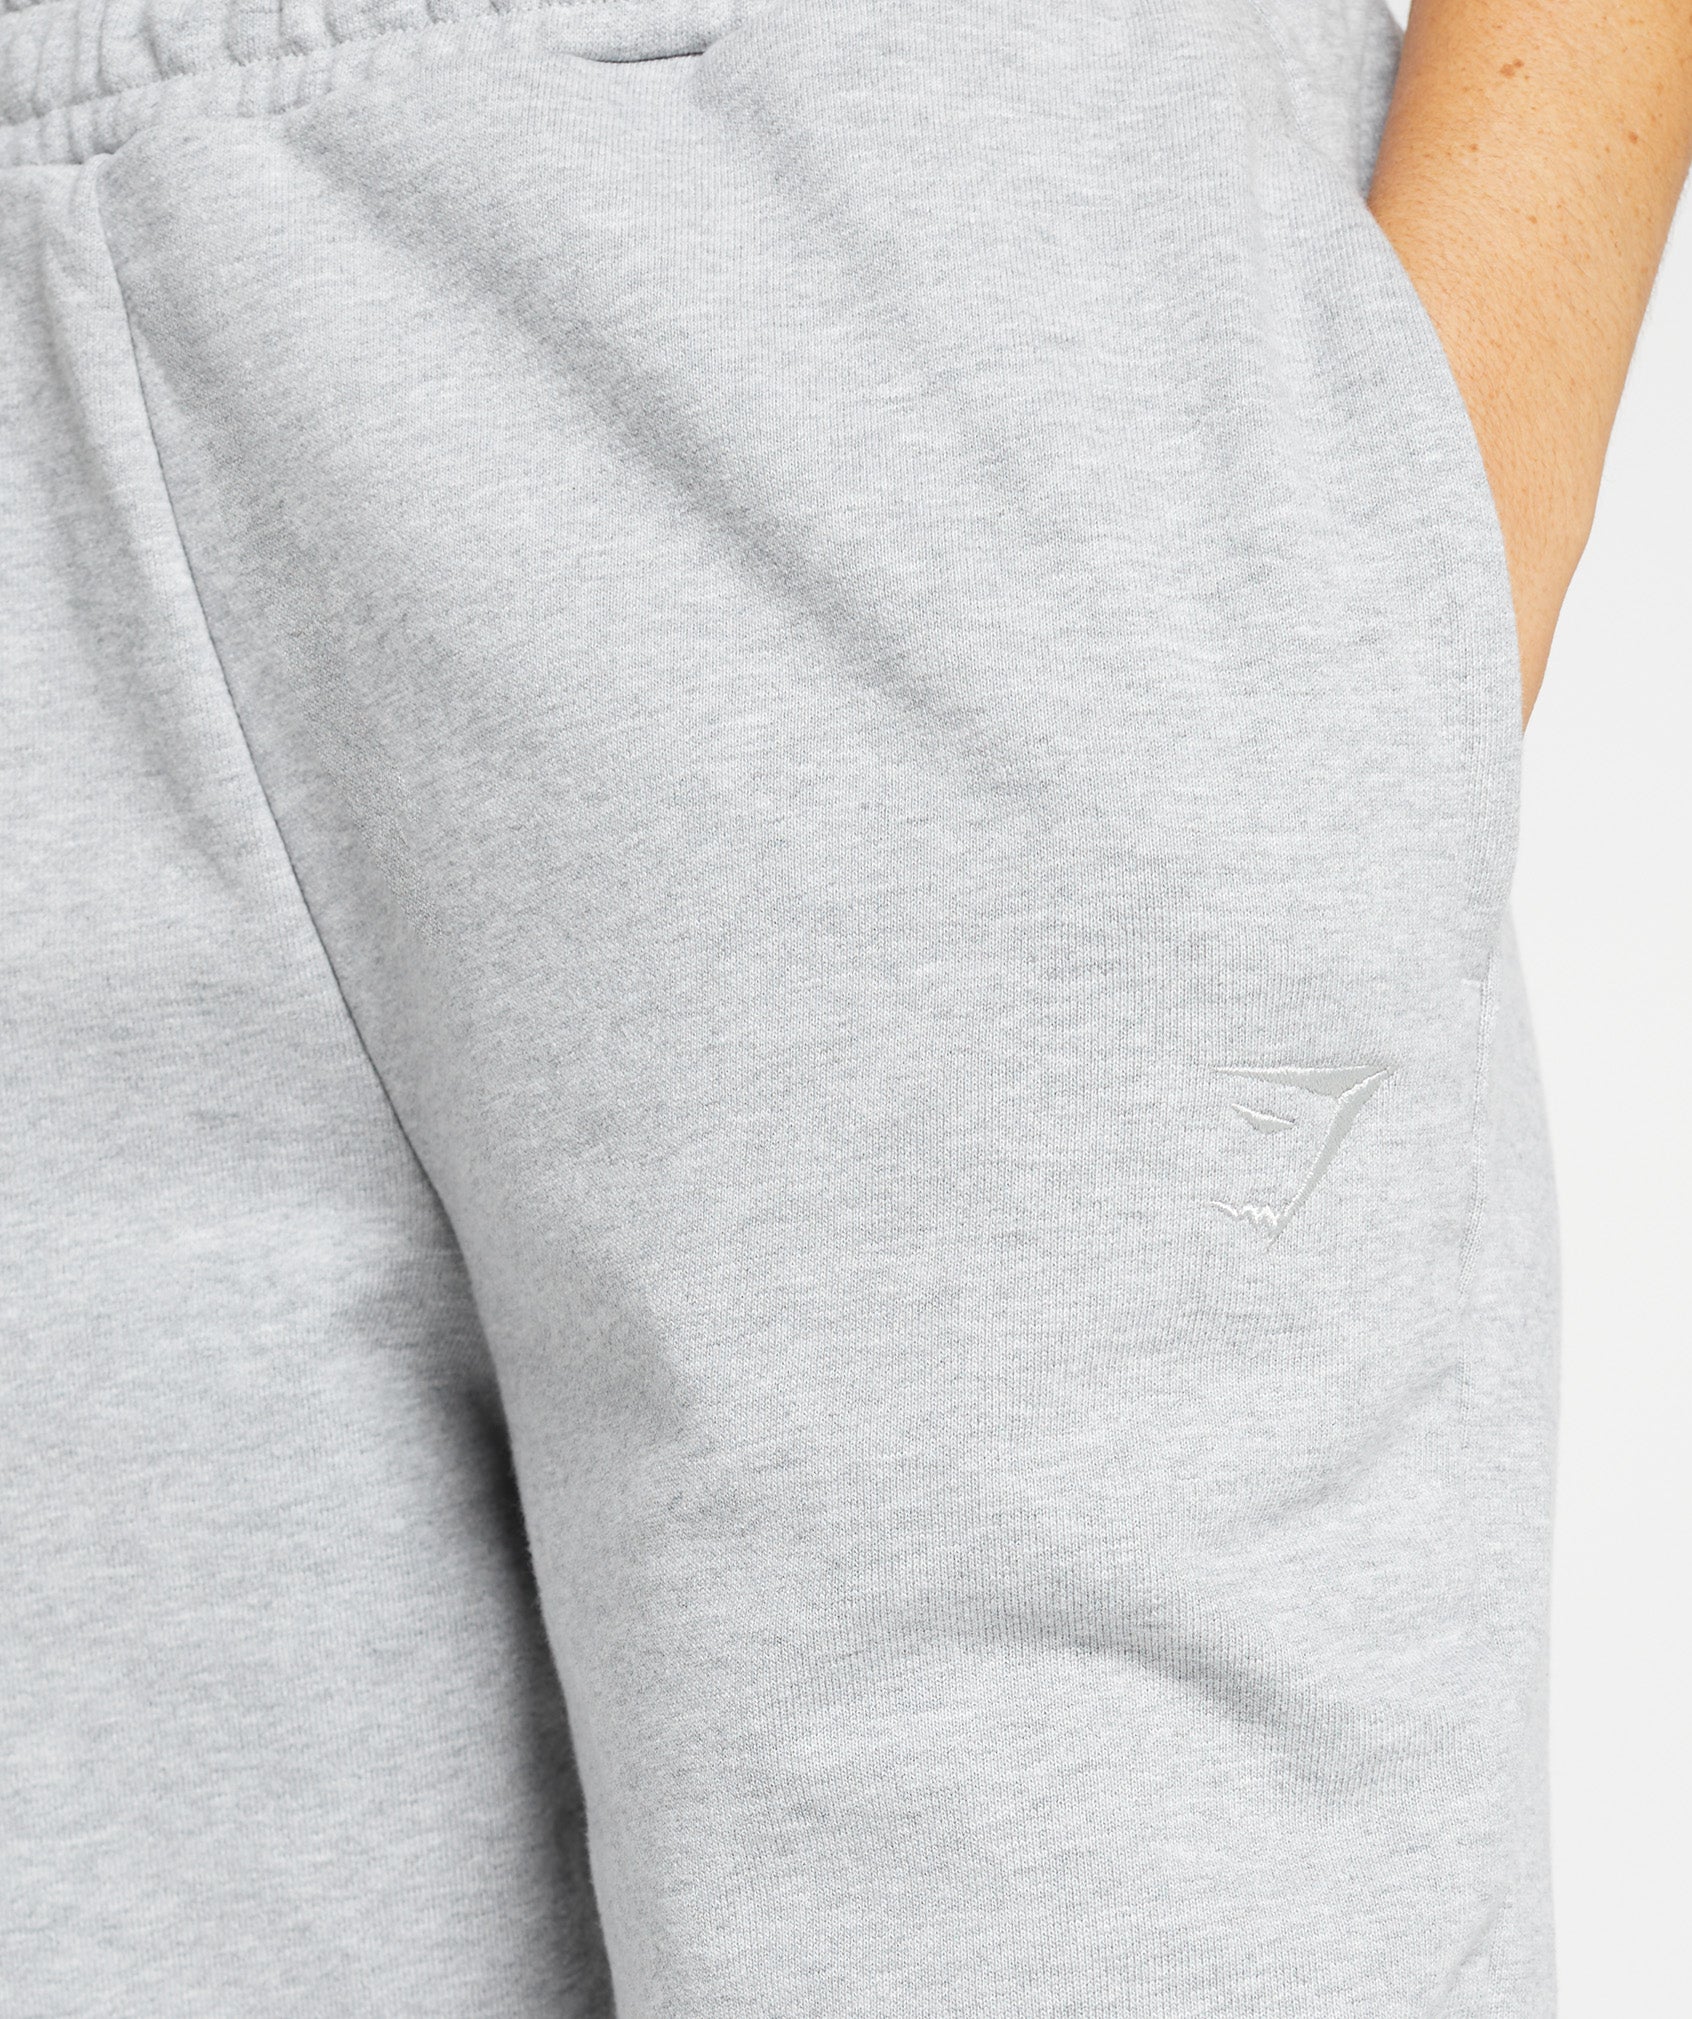 Rest Day Sweats Joggers in Light Grey Core Marl - view 5